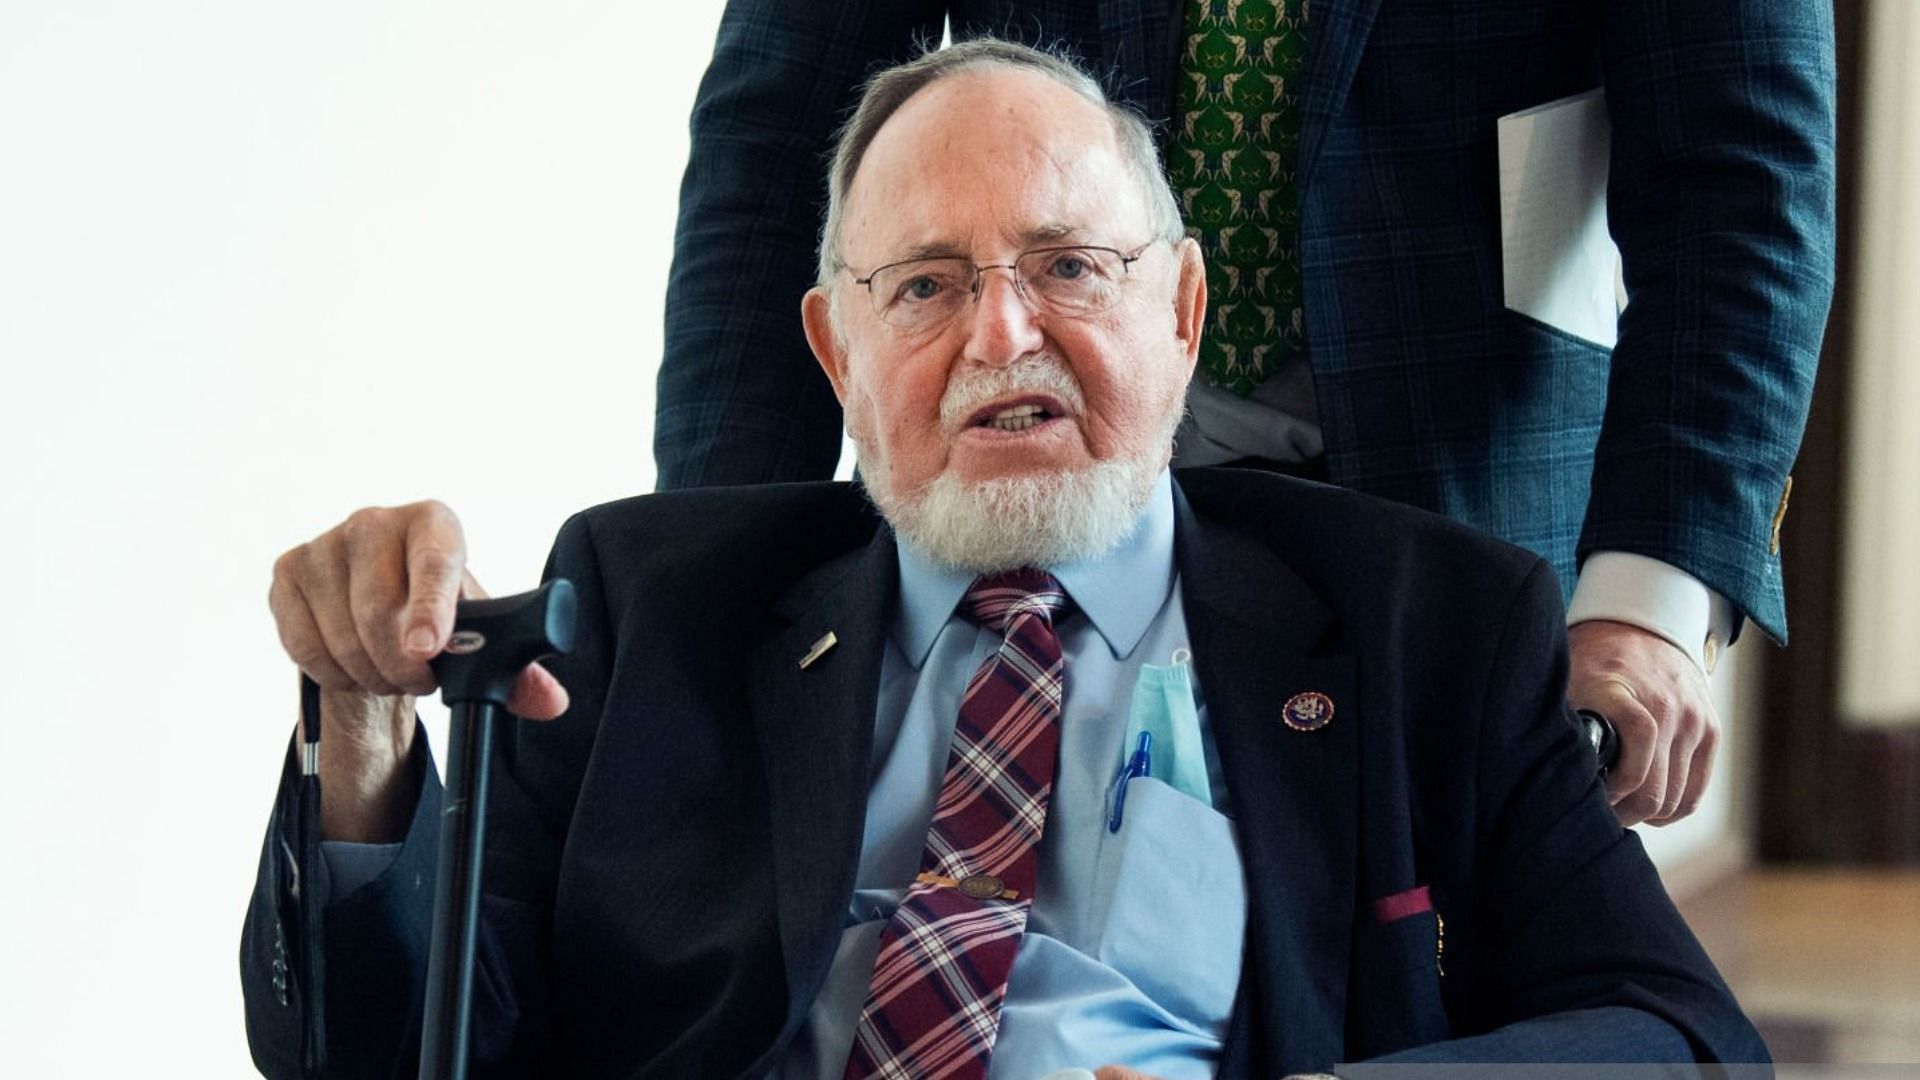 Longest-serving Alaskan Congressman Don Young passed away on March 18 (Image via Tom Williams/Getty Images)